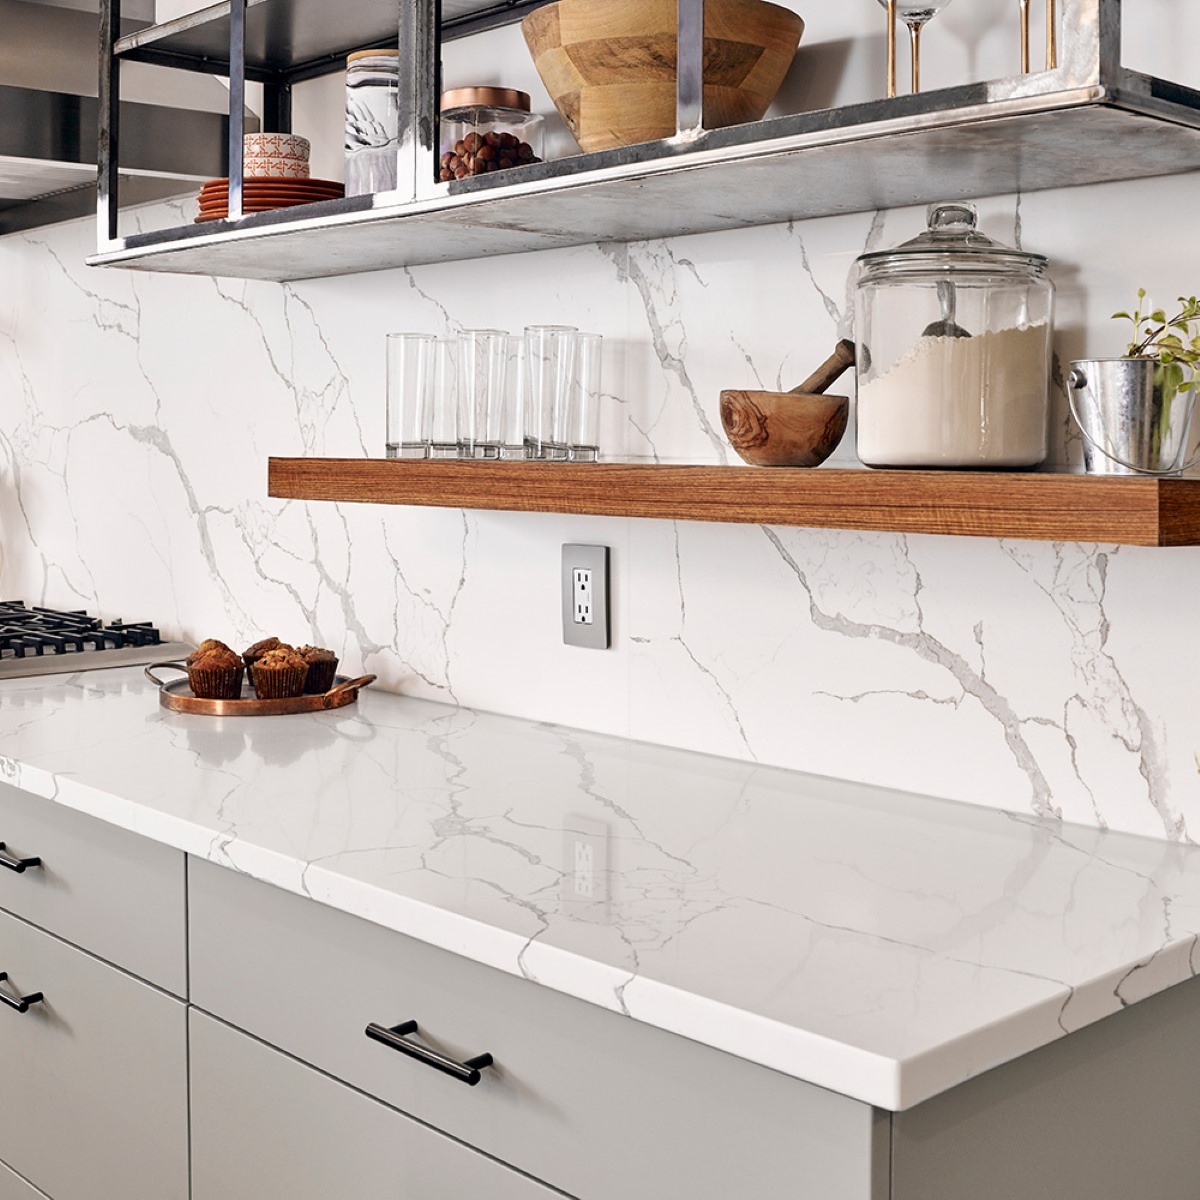 How To Order Countertops From Home Depot